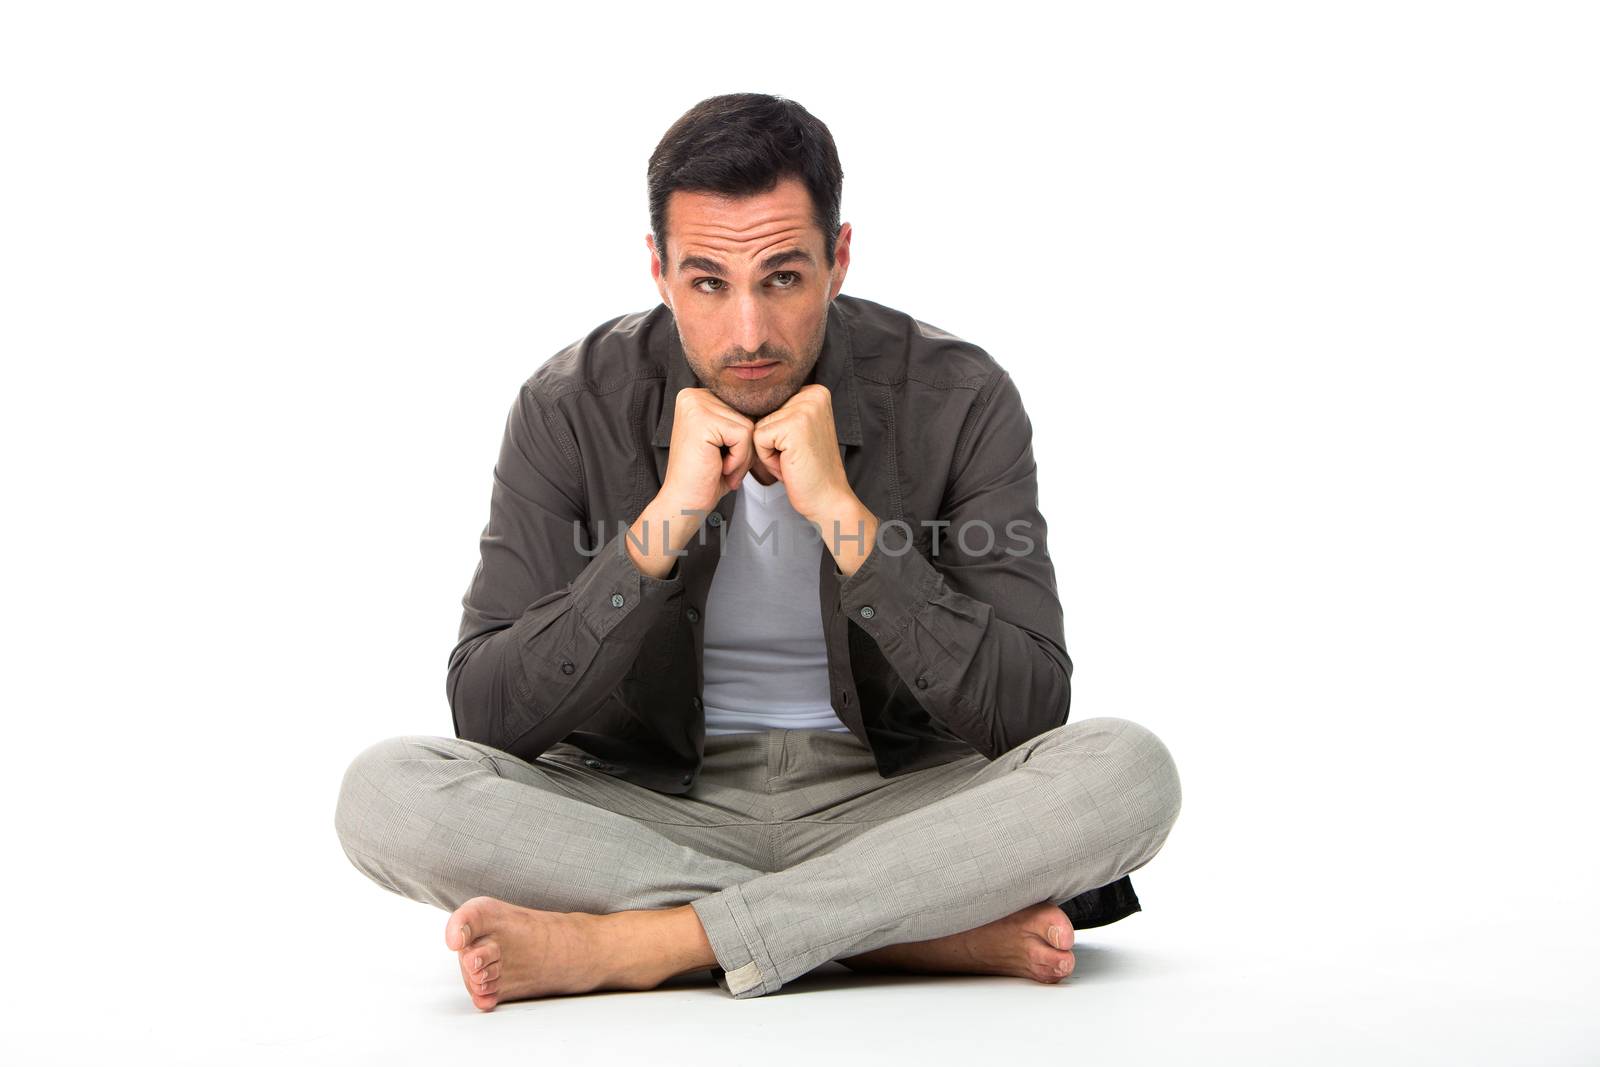 Thoughtful man sitted on the floor with the hands under his chin